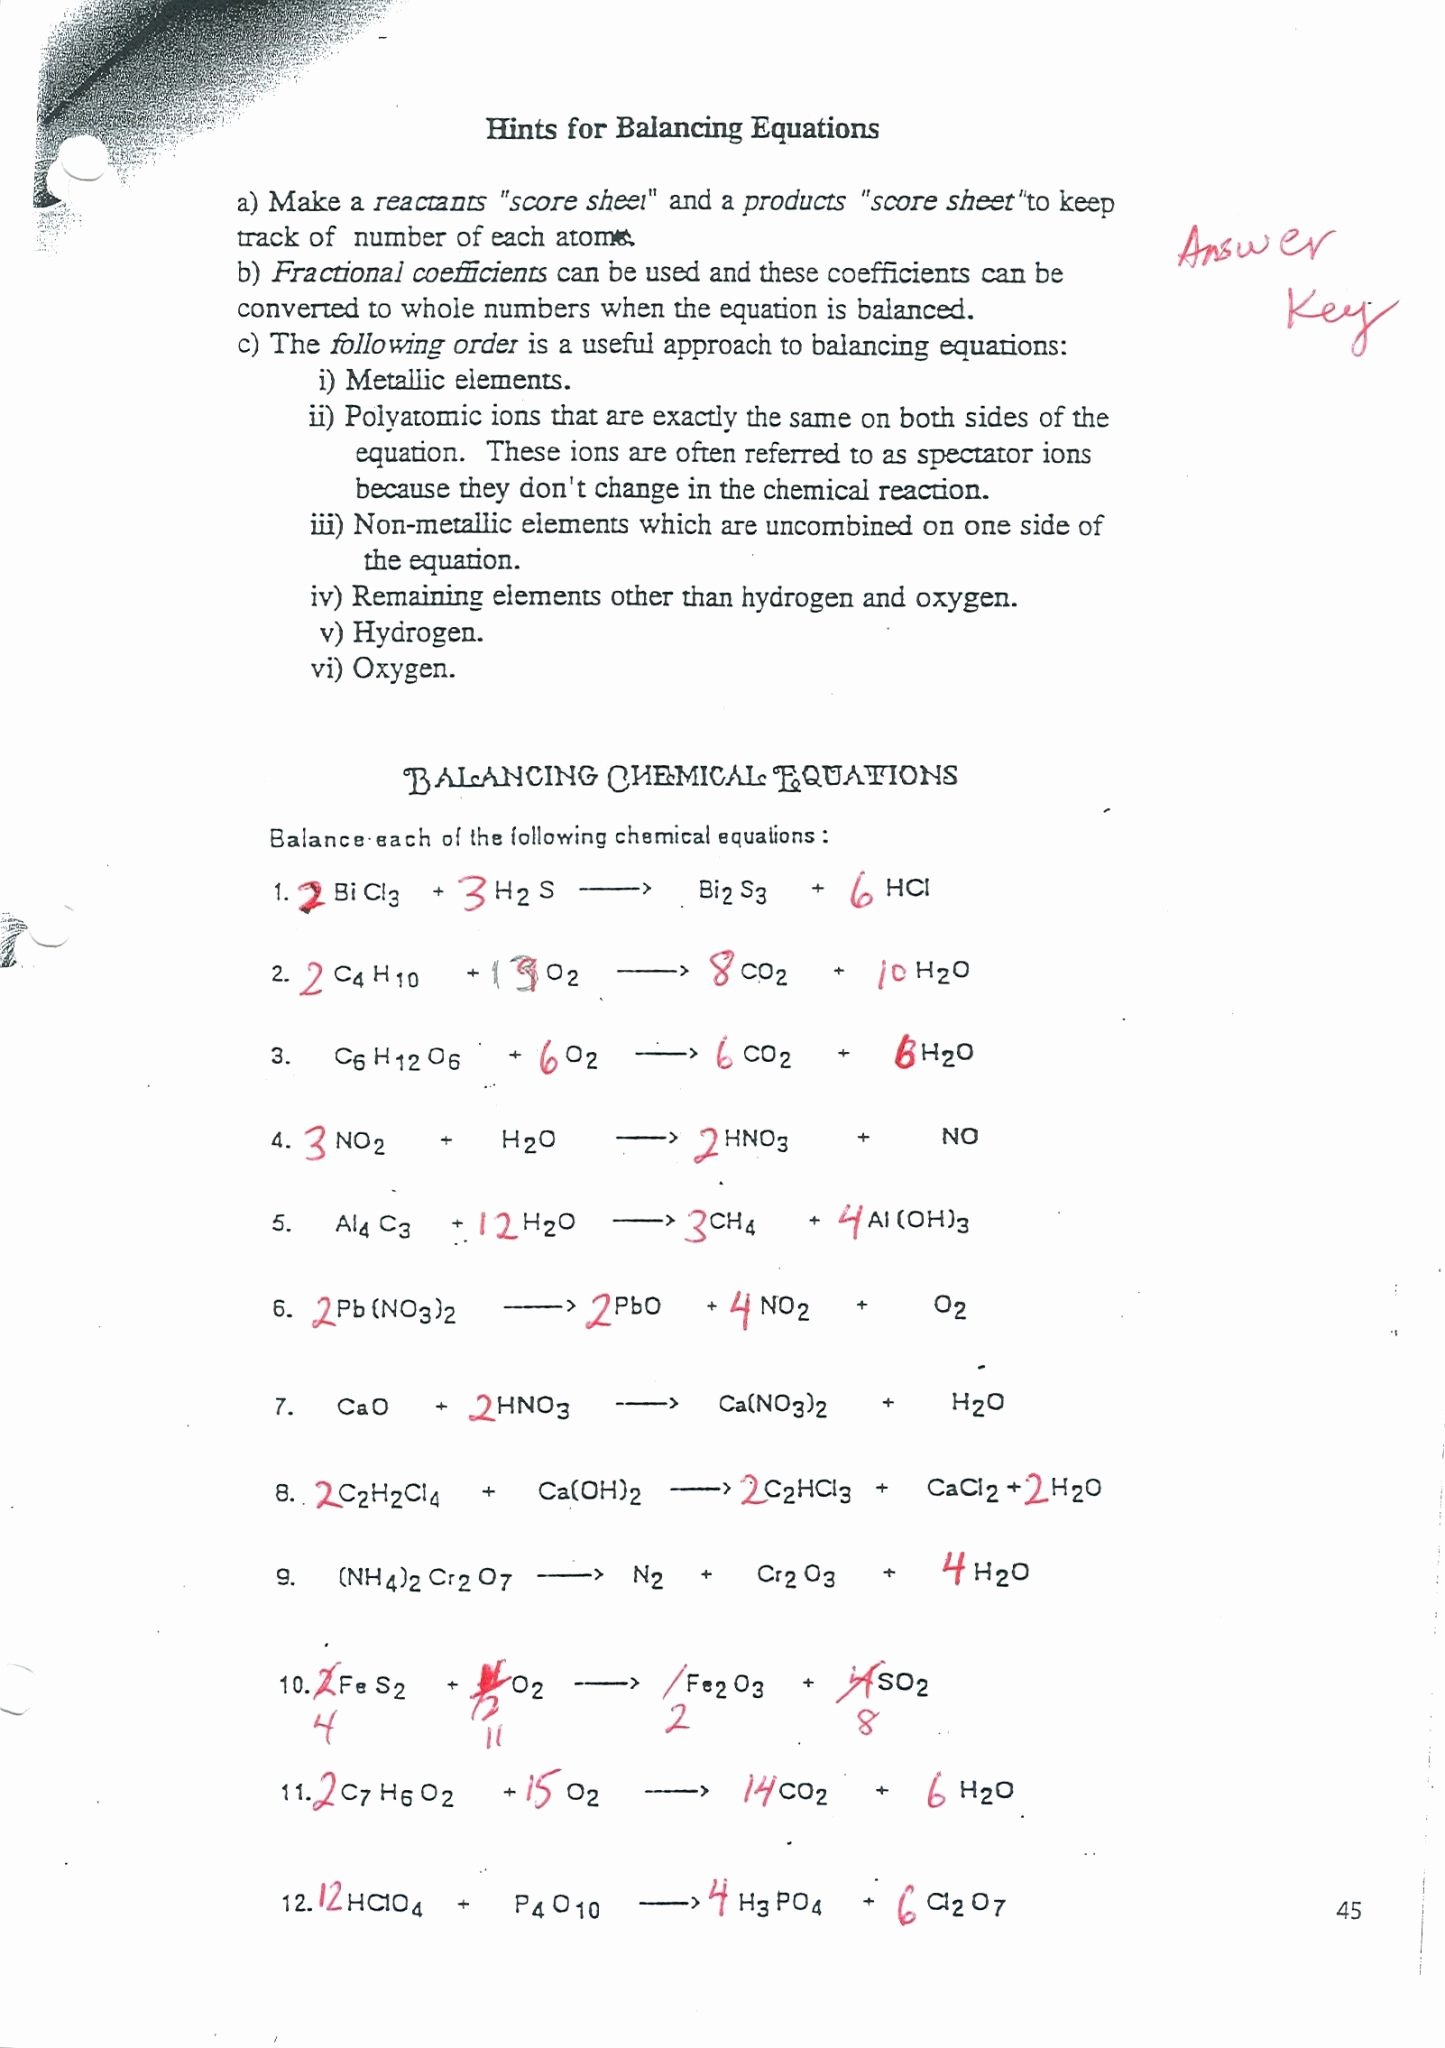 Chemical Reactions Worksheet Answers Unique Balancing Chemical Equations Worksheet Answer Key